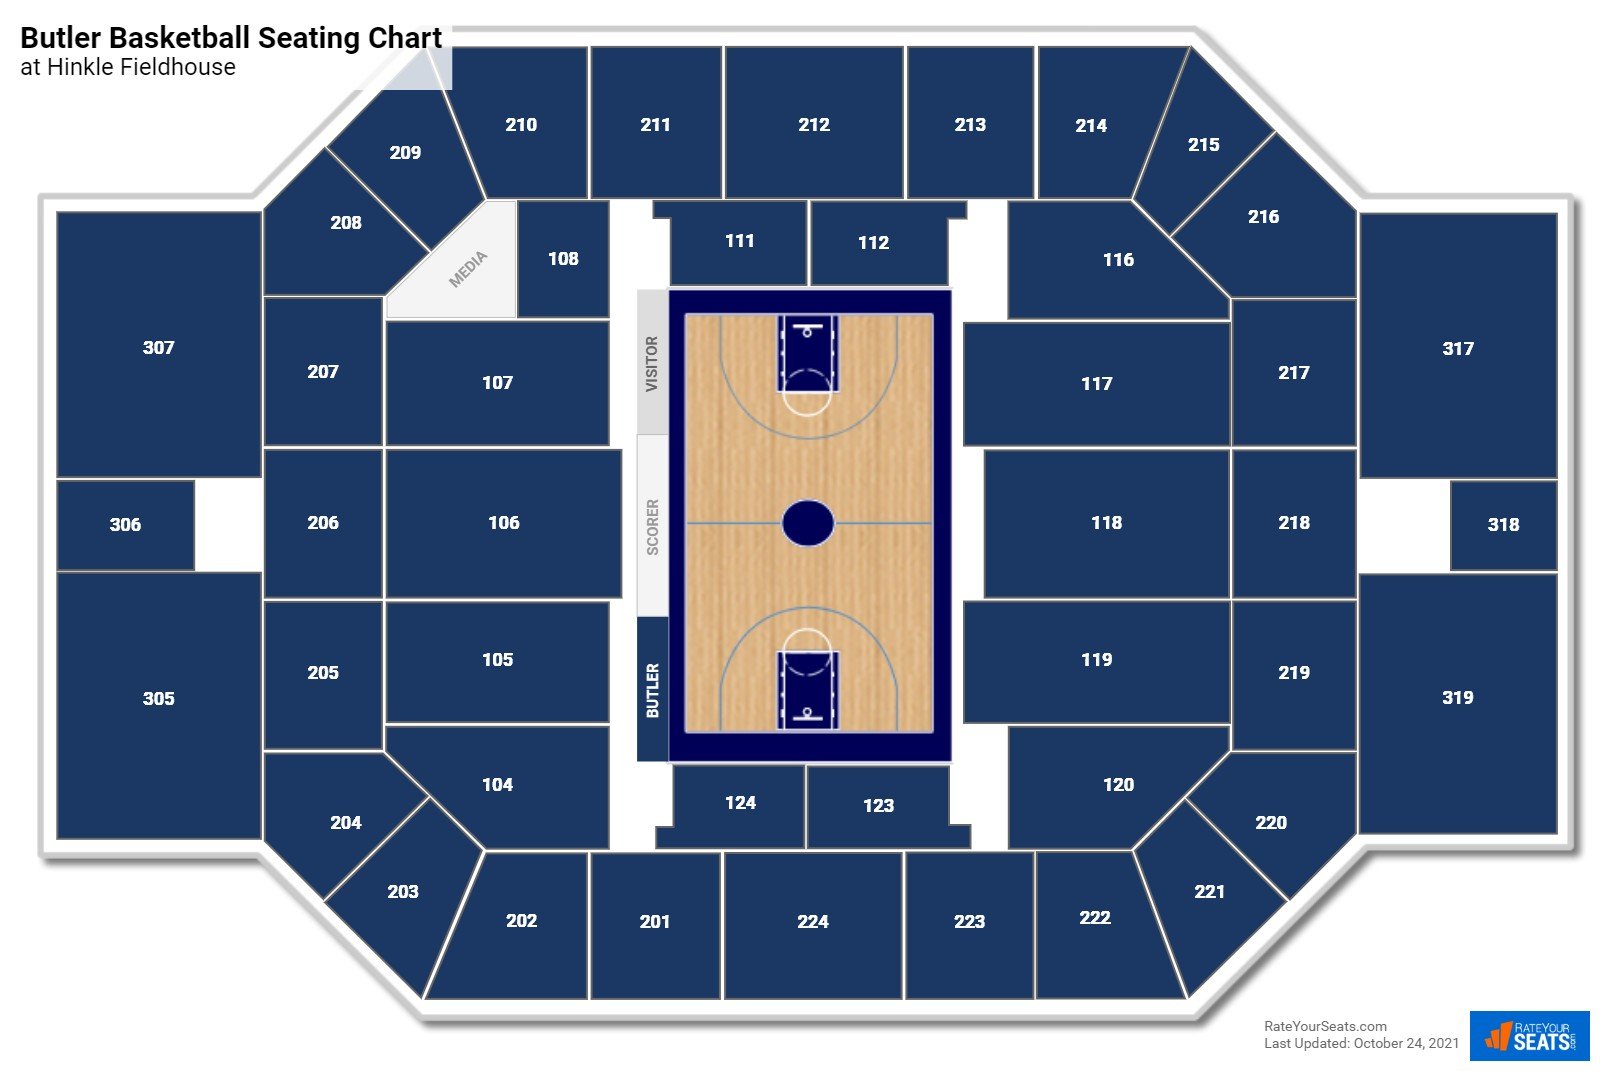 Butler Bulldogs Seating Chart at Hinkle Fieldhouse